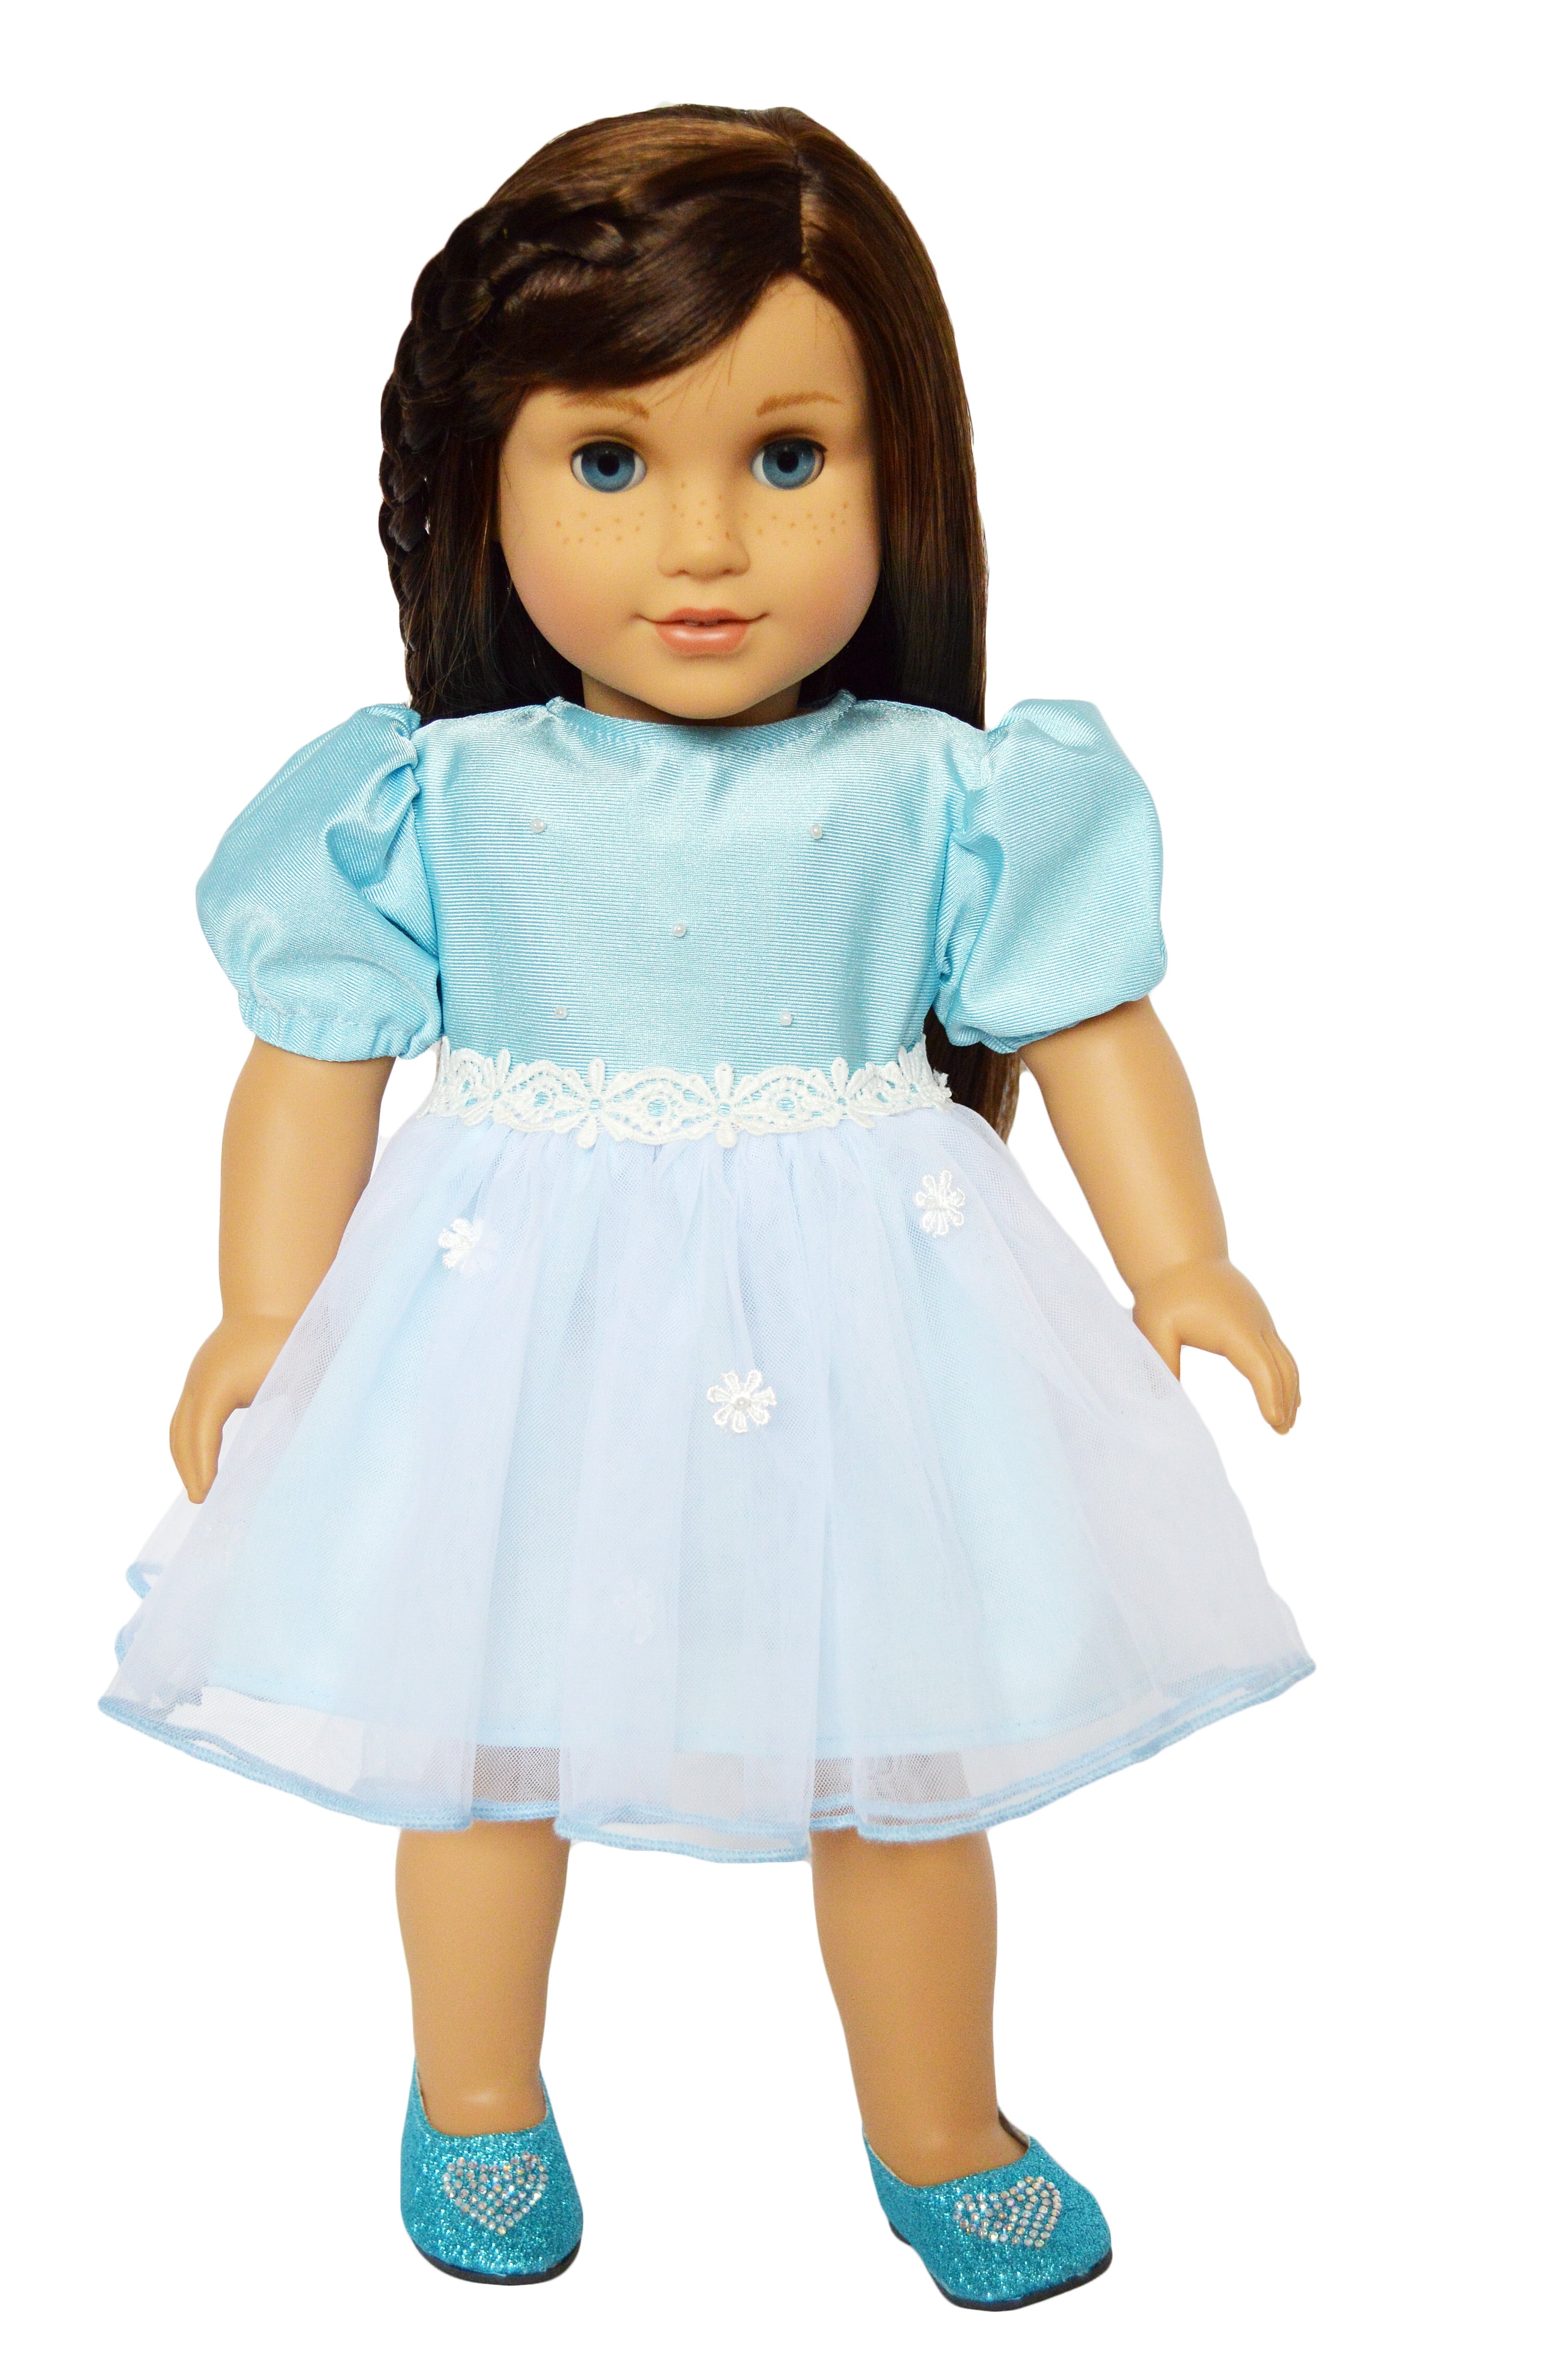 Doll Clothes Blue Dress Fits 18 Inch Dolls Such As American Girl Dolls And My Life As Dolls 18